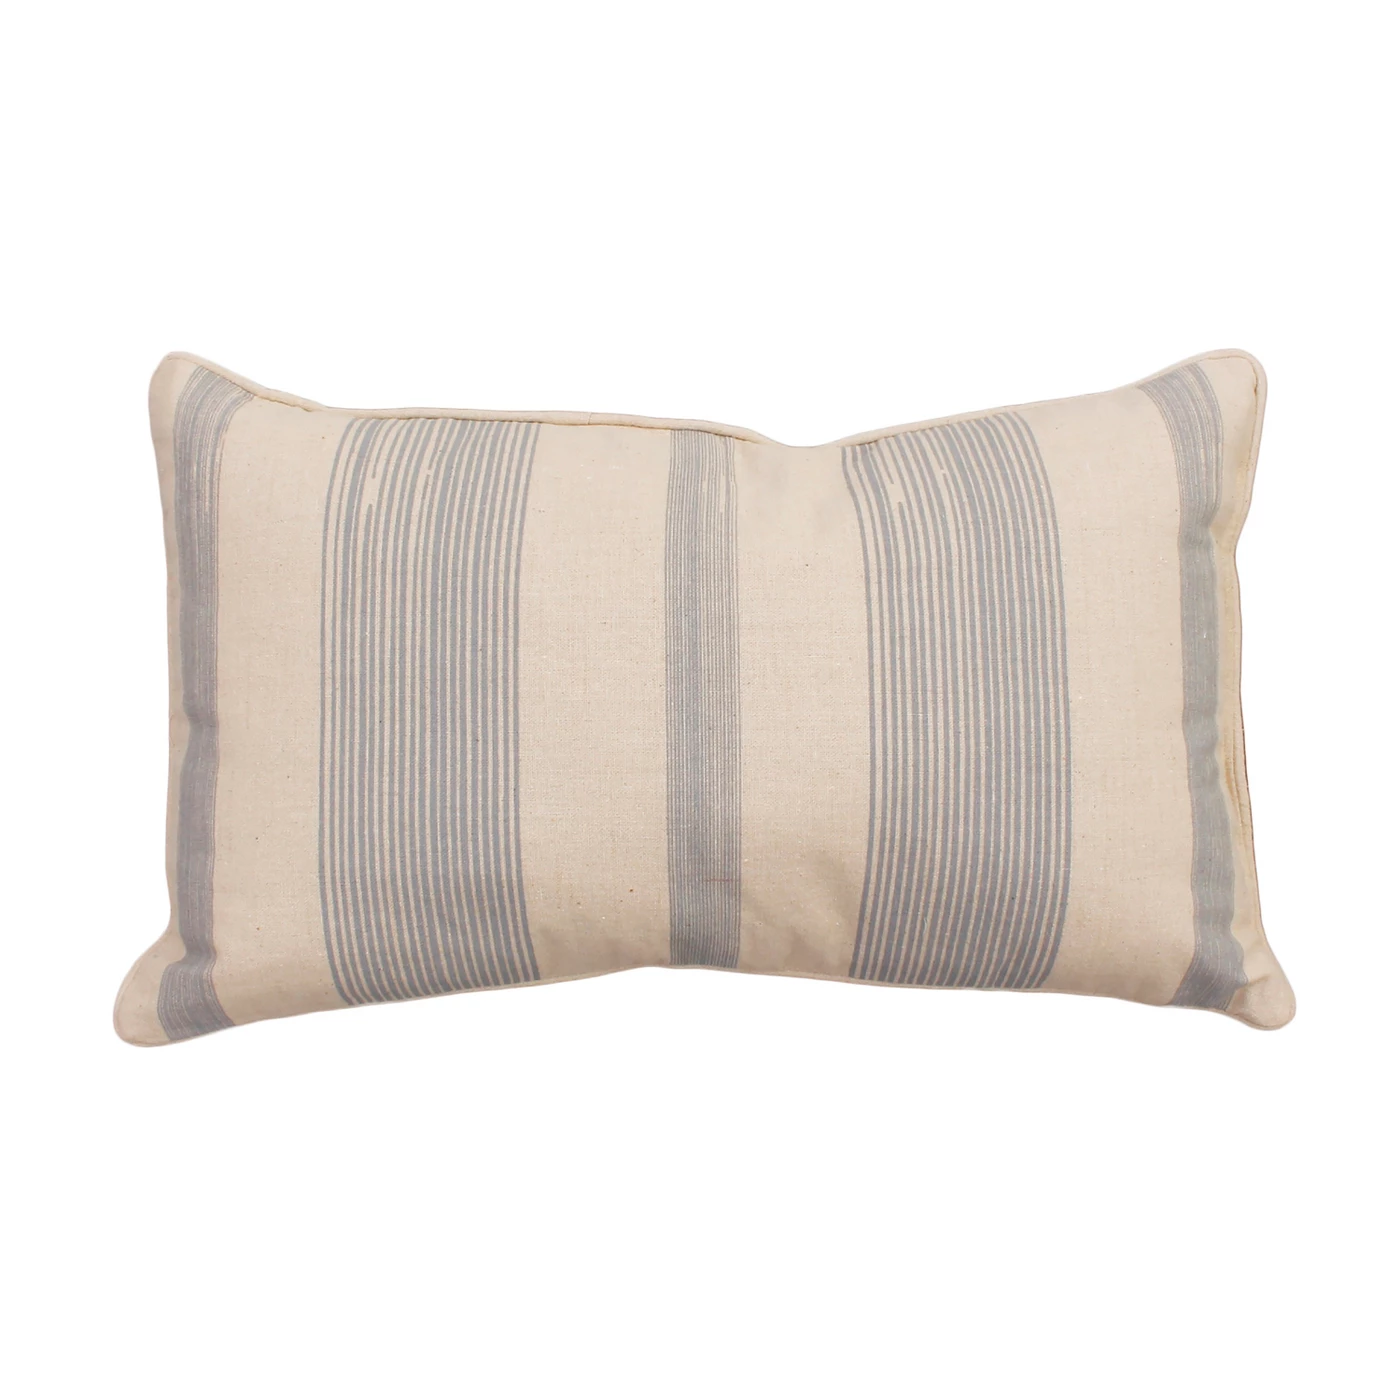 Levi Stripe Lumbar Throw Pillow - Dcor Therapy. 20 Lovely French Farmhouse Finds at Target on Hello Lovely! #frenchfarmhouse #frenchdecor #homedecor #interiordesign #frenchcountry #pillows